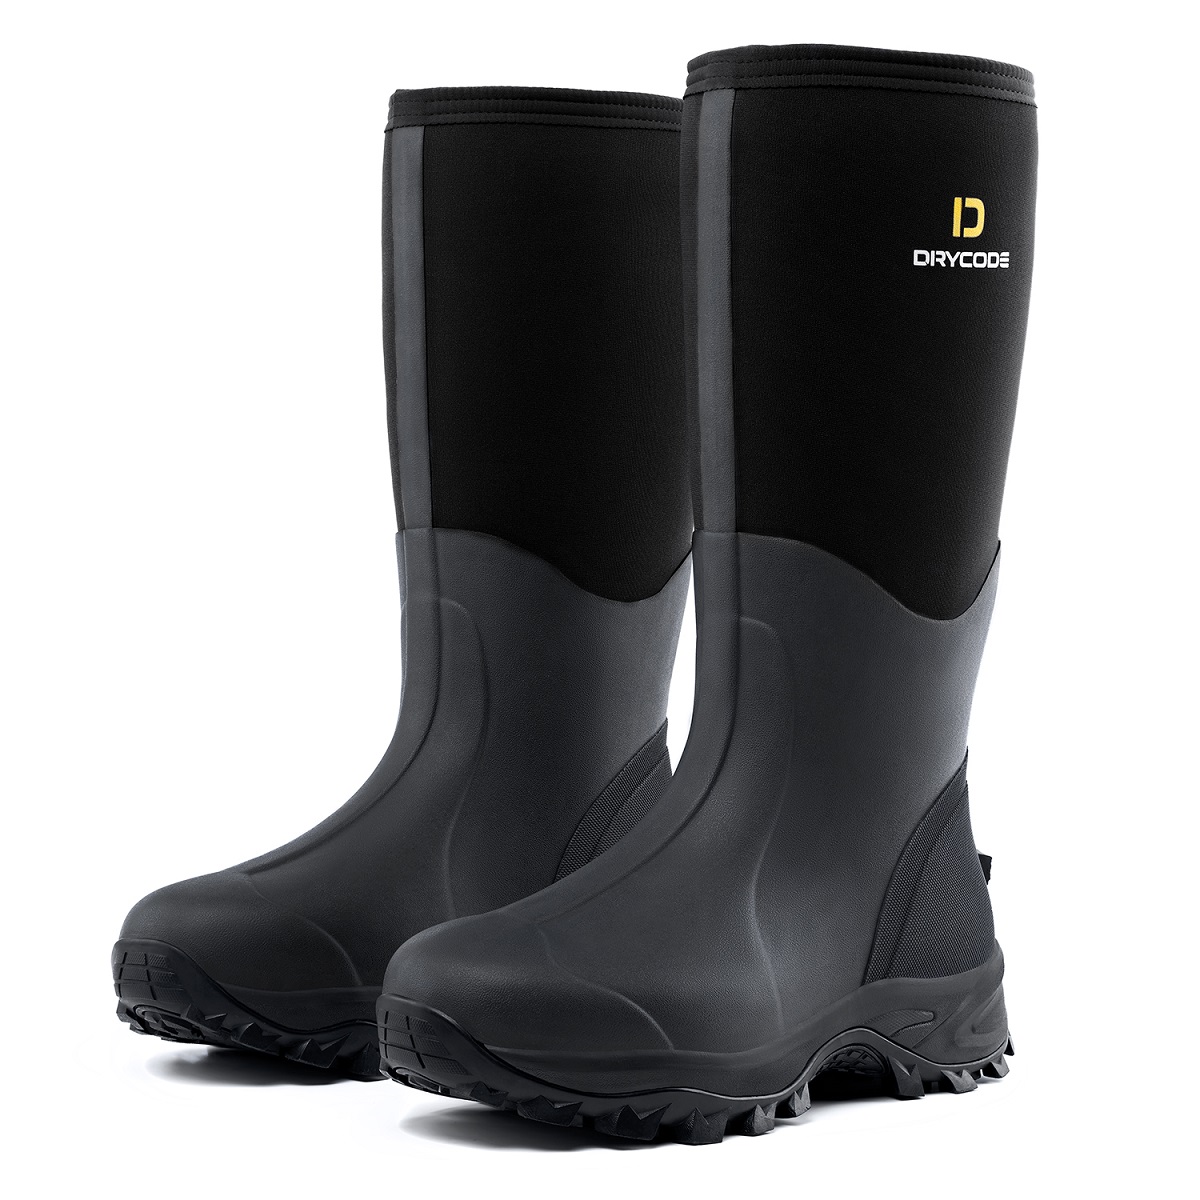 D DRYCODE Rubber Boots for Women, Rain Boots with